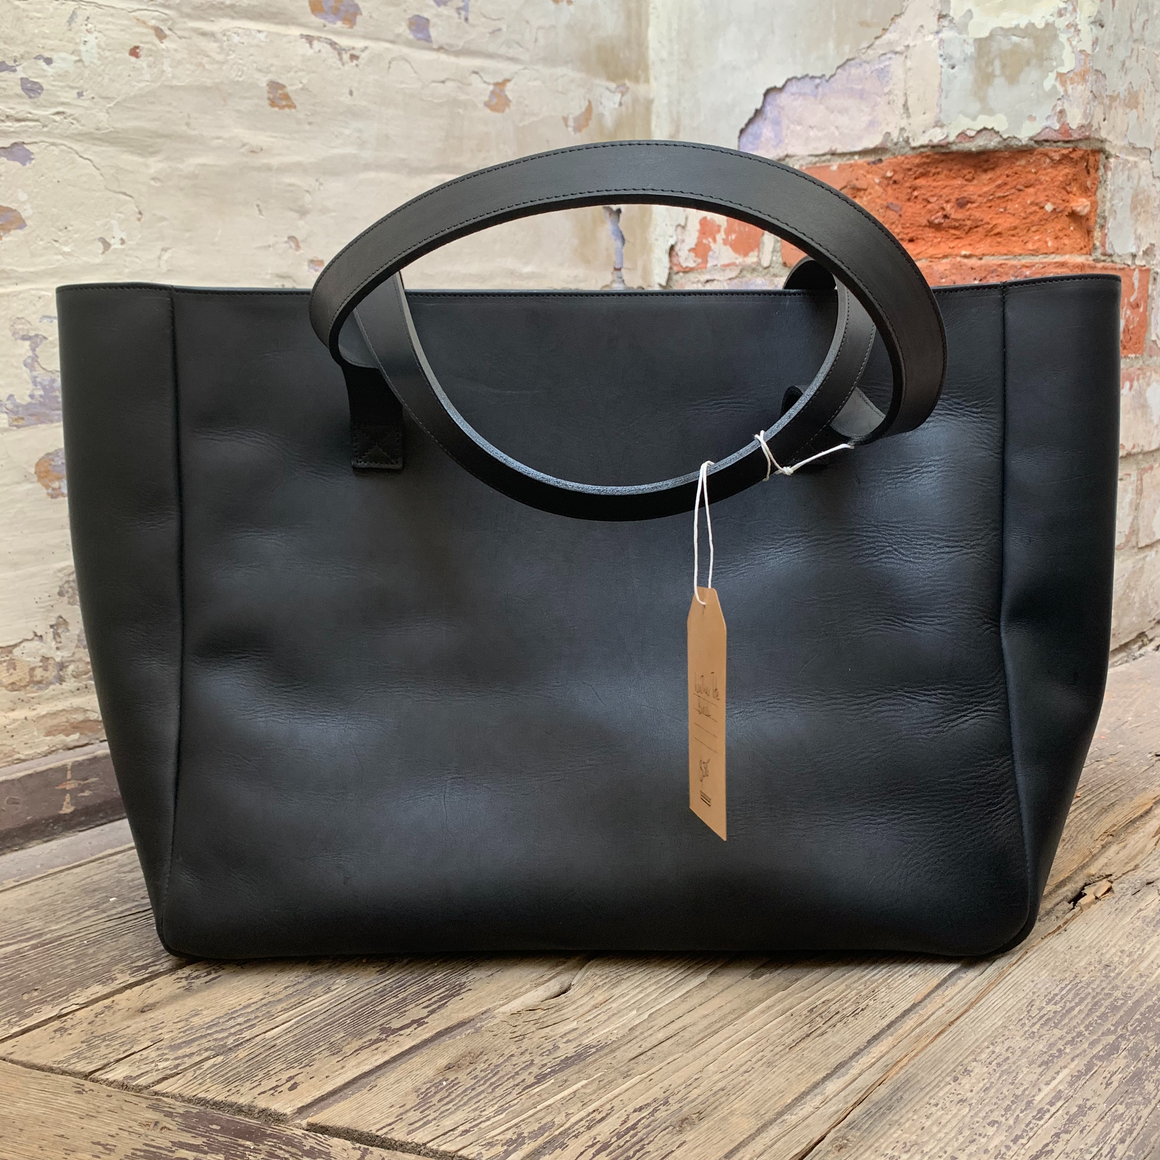 Chestnut Large Leather Tote